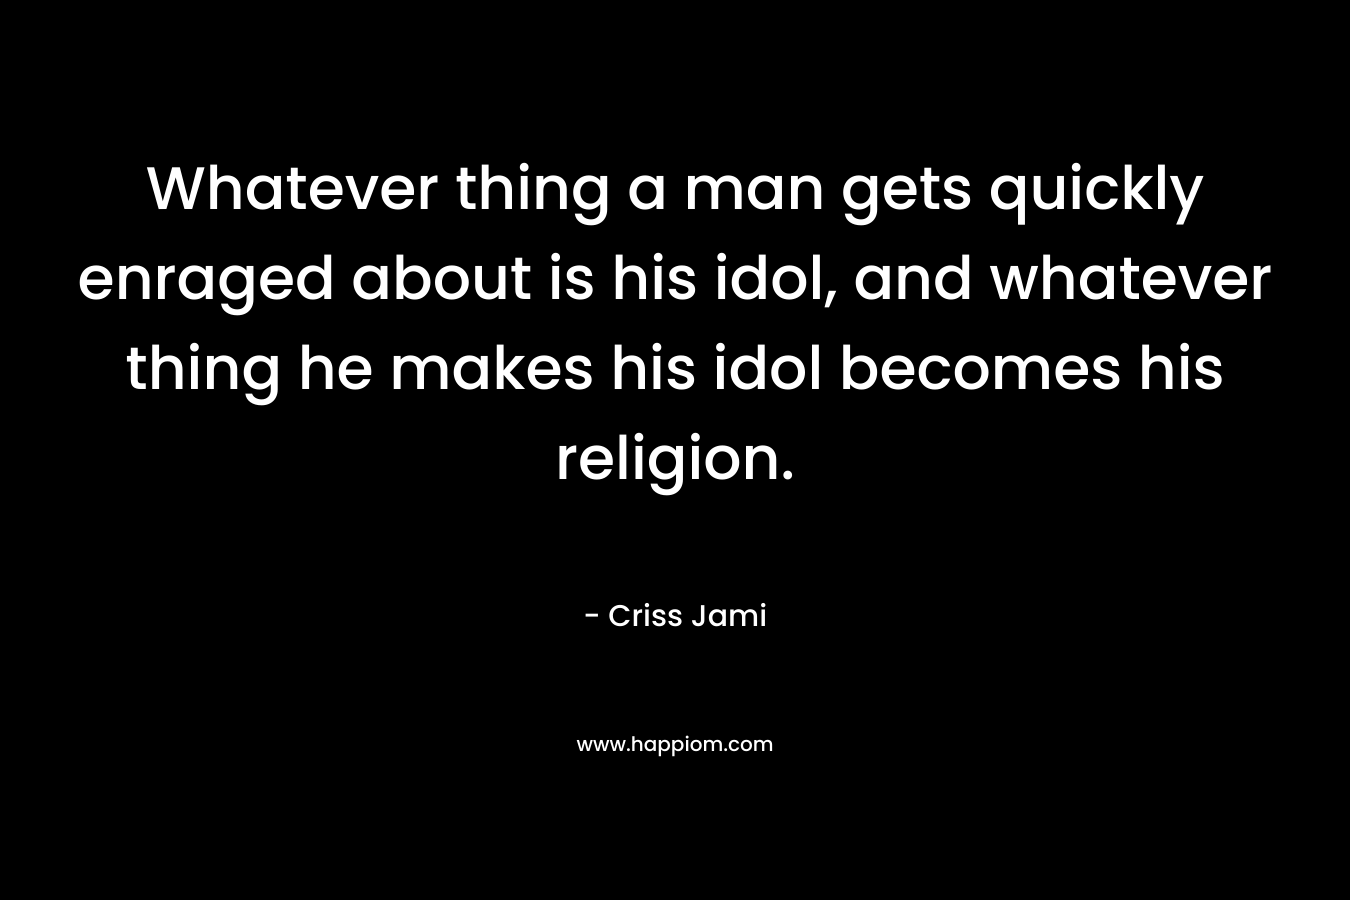 Whatever thing a man gets quickly enraged about is his idol, and whatever thing he makes his idol becomes his religion.